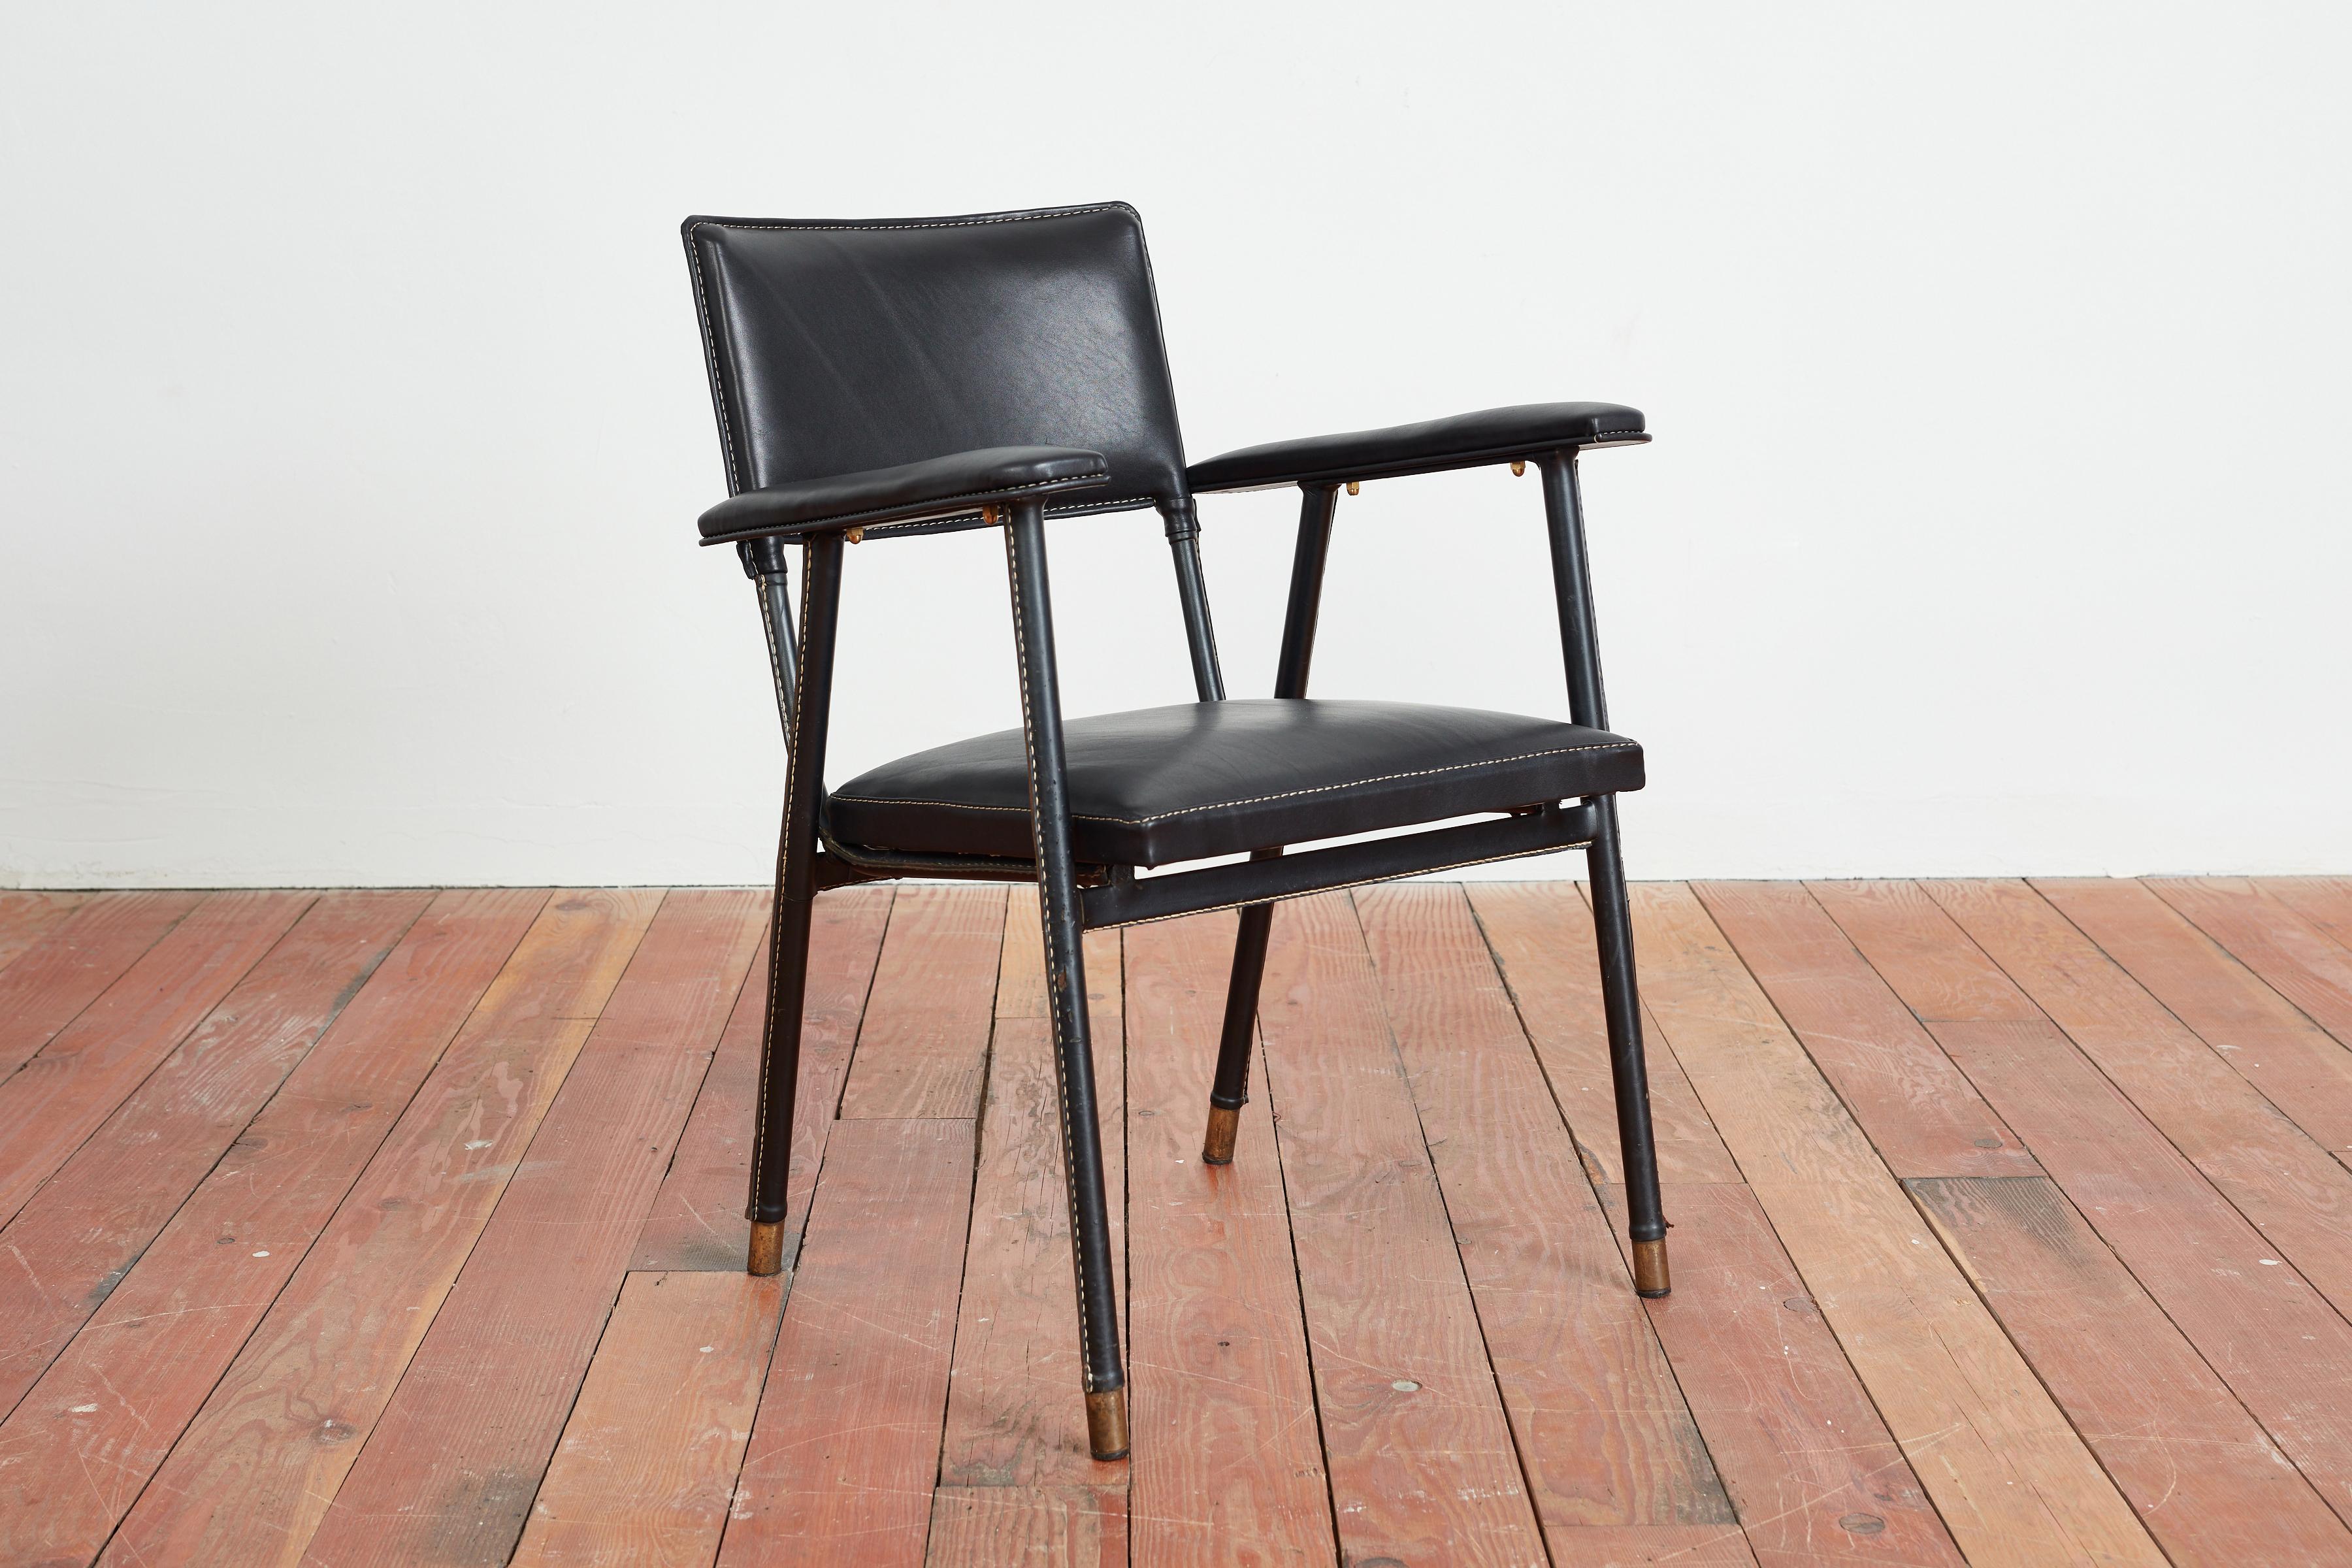 Jacques Quinet arm chair in black leather with signature contrast hand stitching and thick brass feet.
Wonderful angled legs and patina to leather on legs. 
Seat newly upholstered in France. 
France, 1950s
